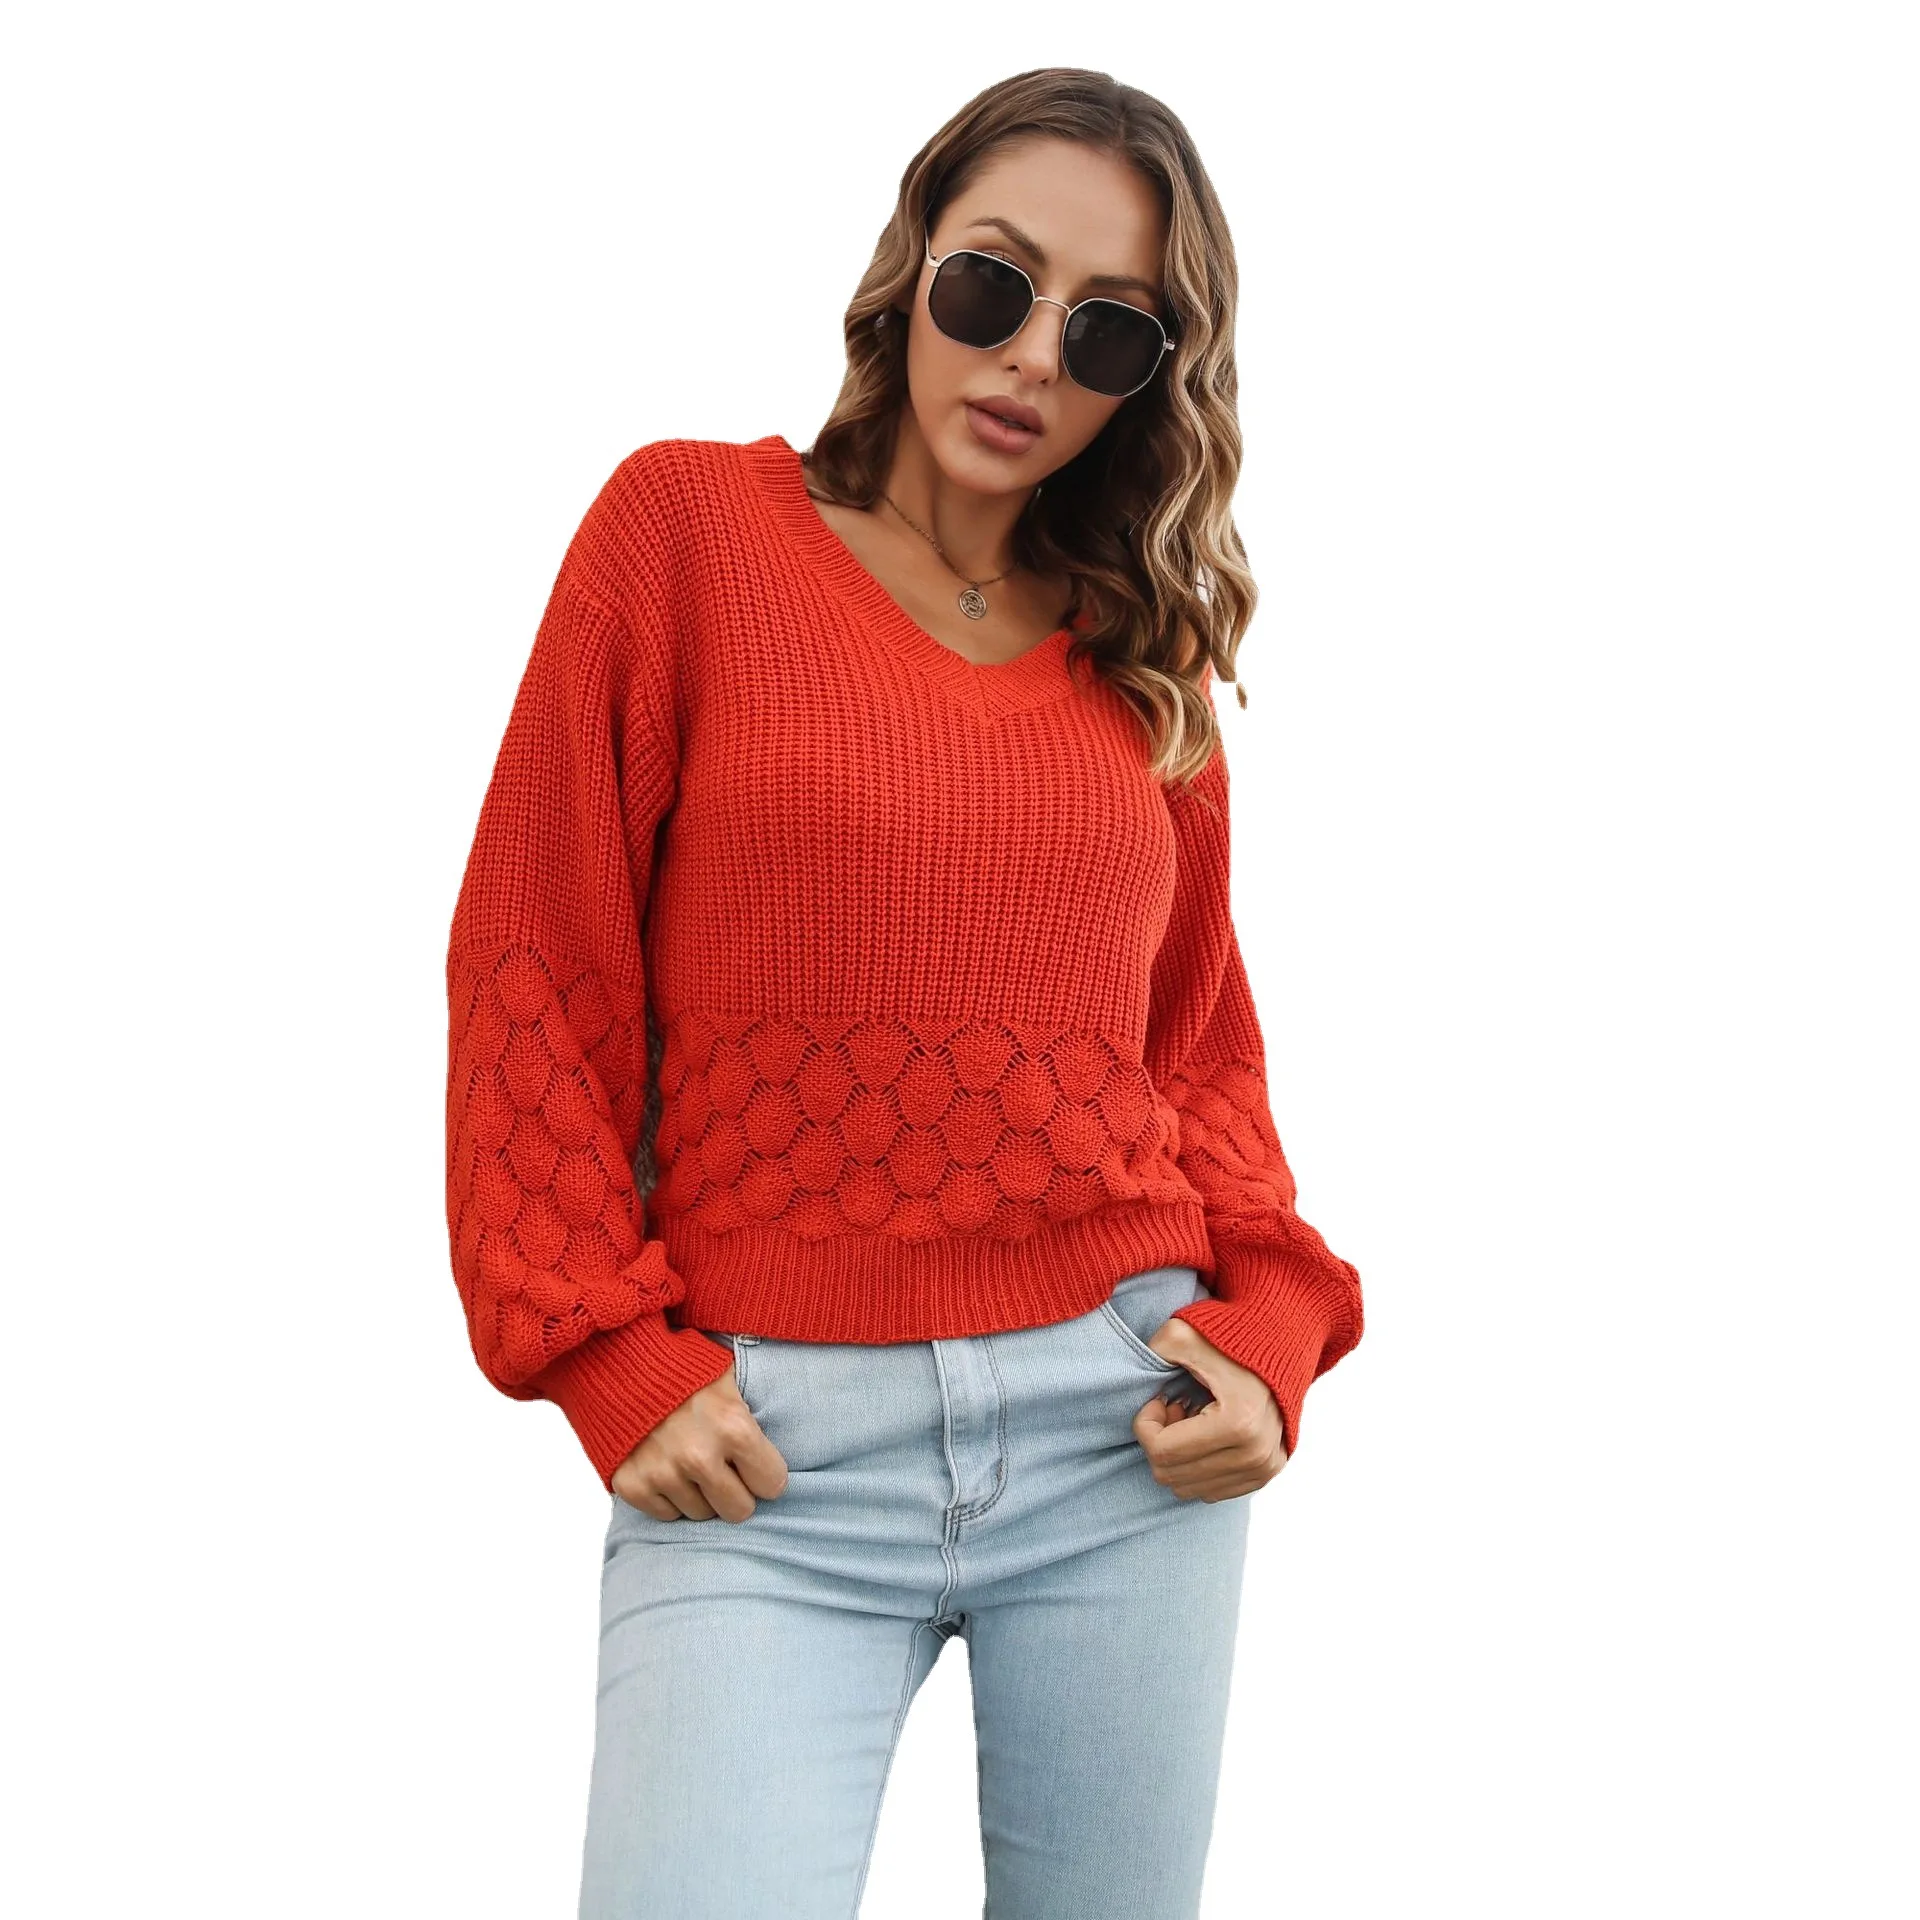 Three-dimensional Feather Sweater Women's Loose Autumn and Winter Lantern Sleeve Knitted Sweater Popular Sweater New enlarge